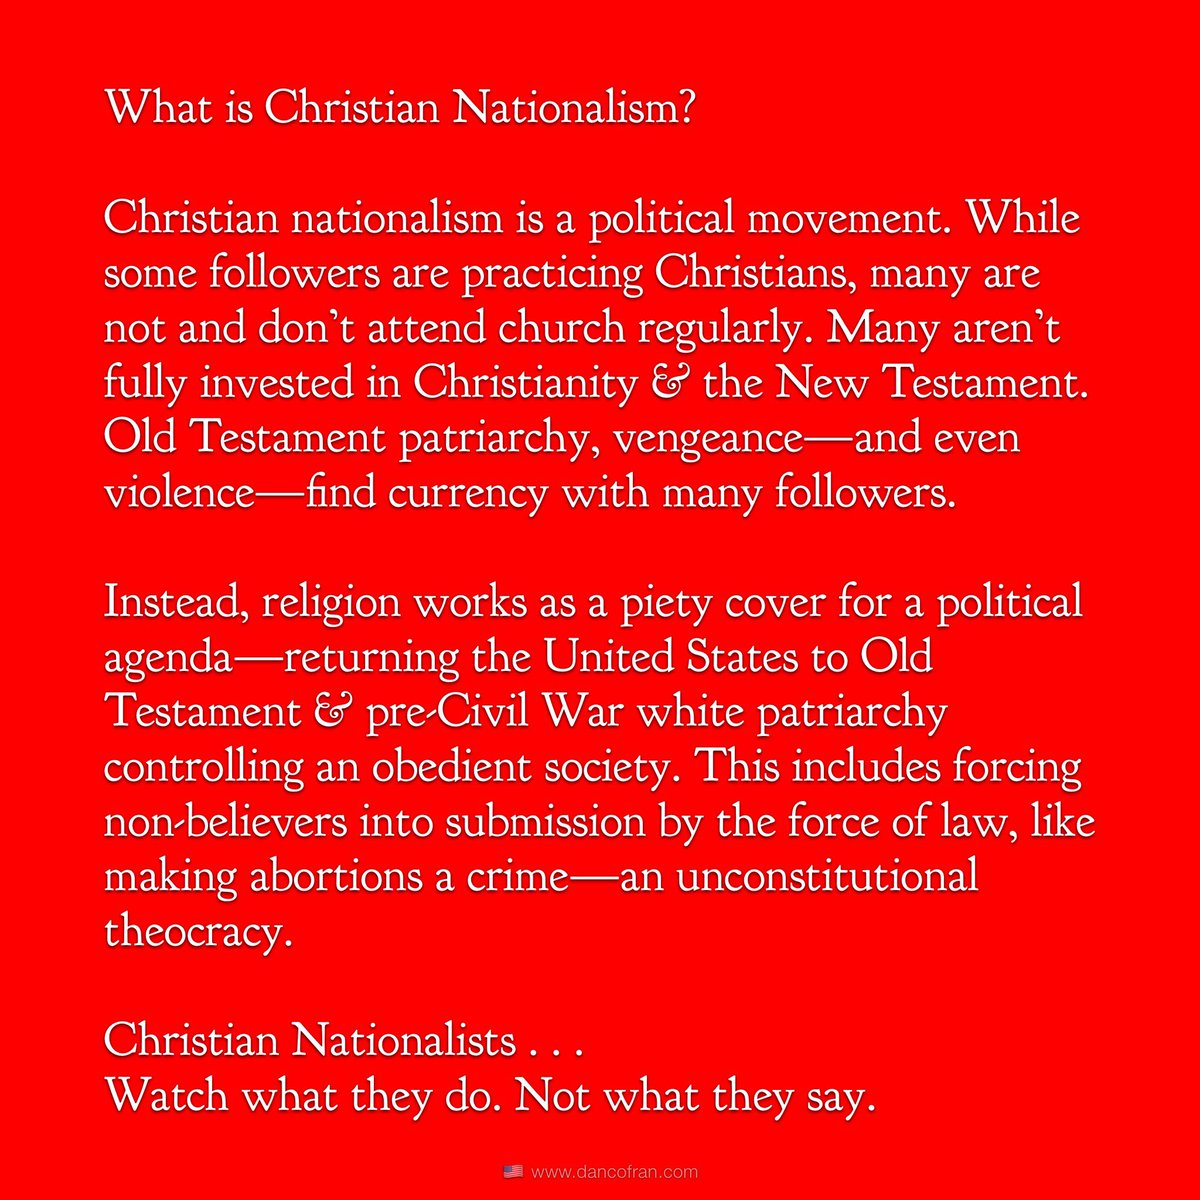 Get to know Christian Nationalism . . .